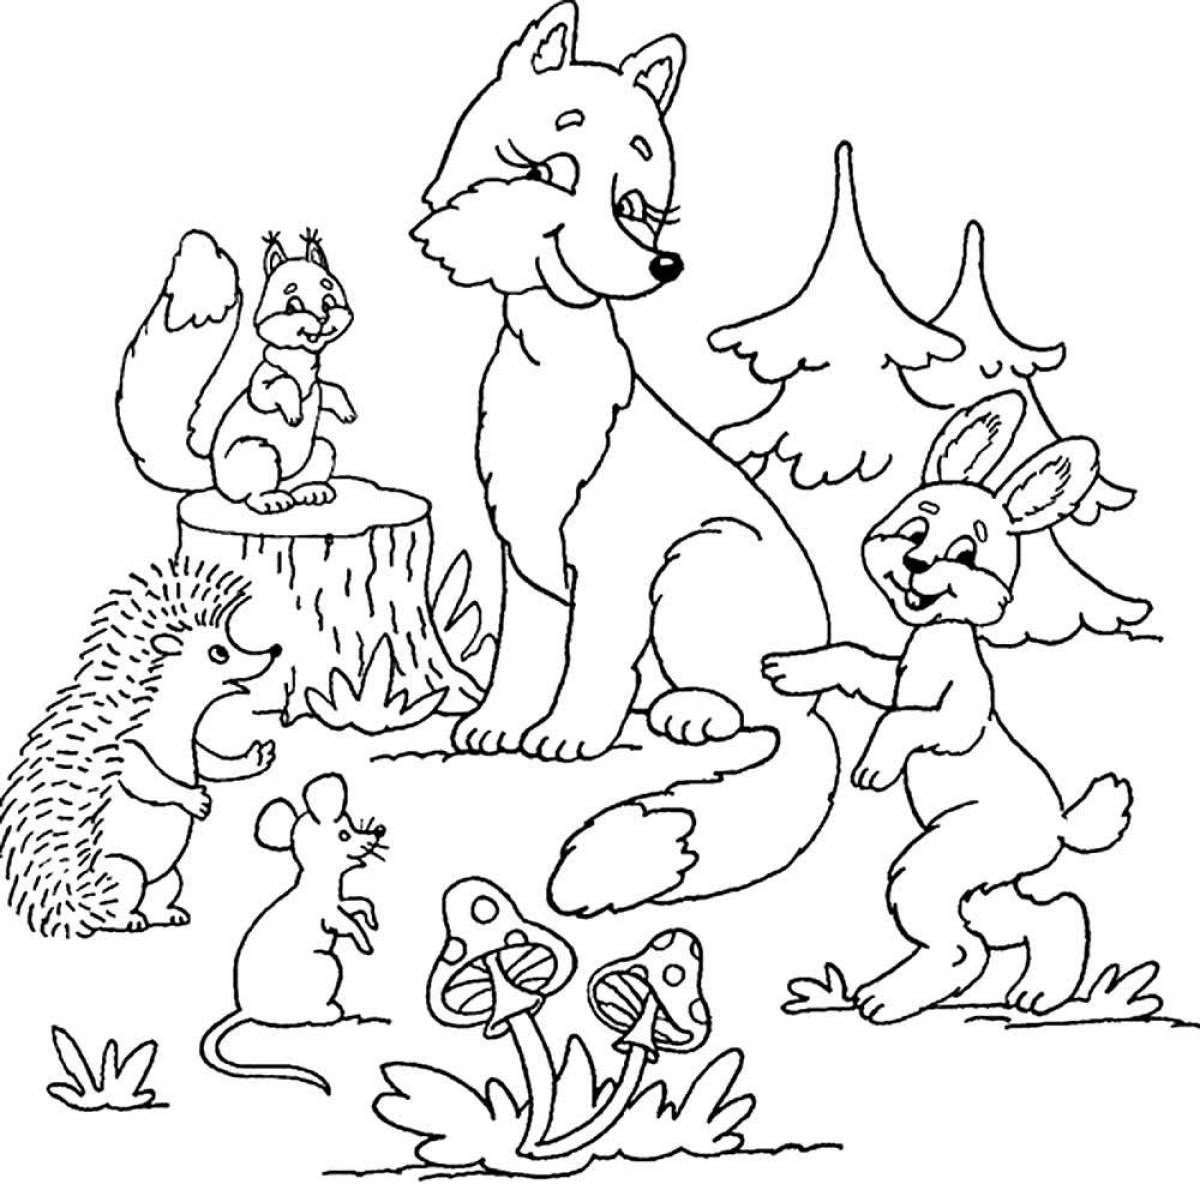 Fun coloring book of wild animals for 4-5 year olds